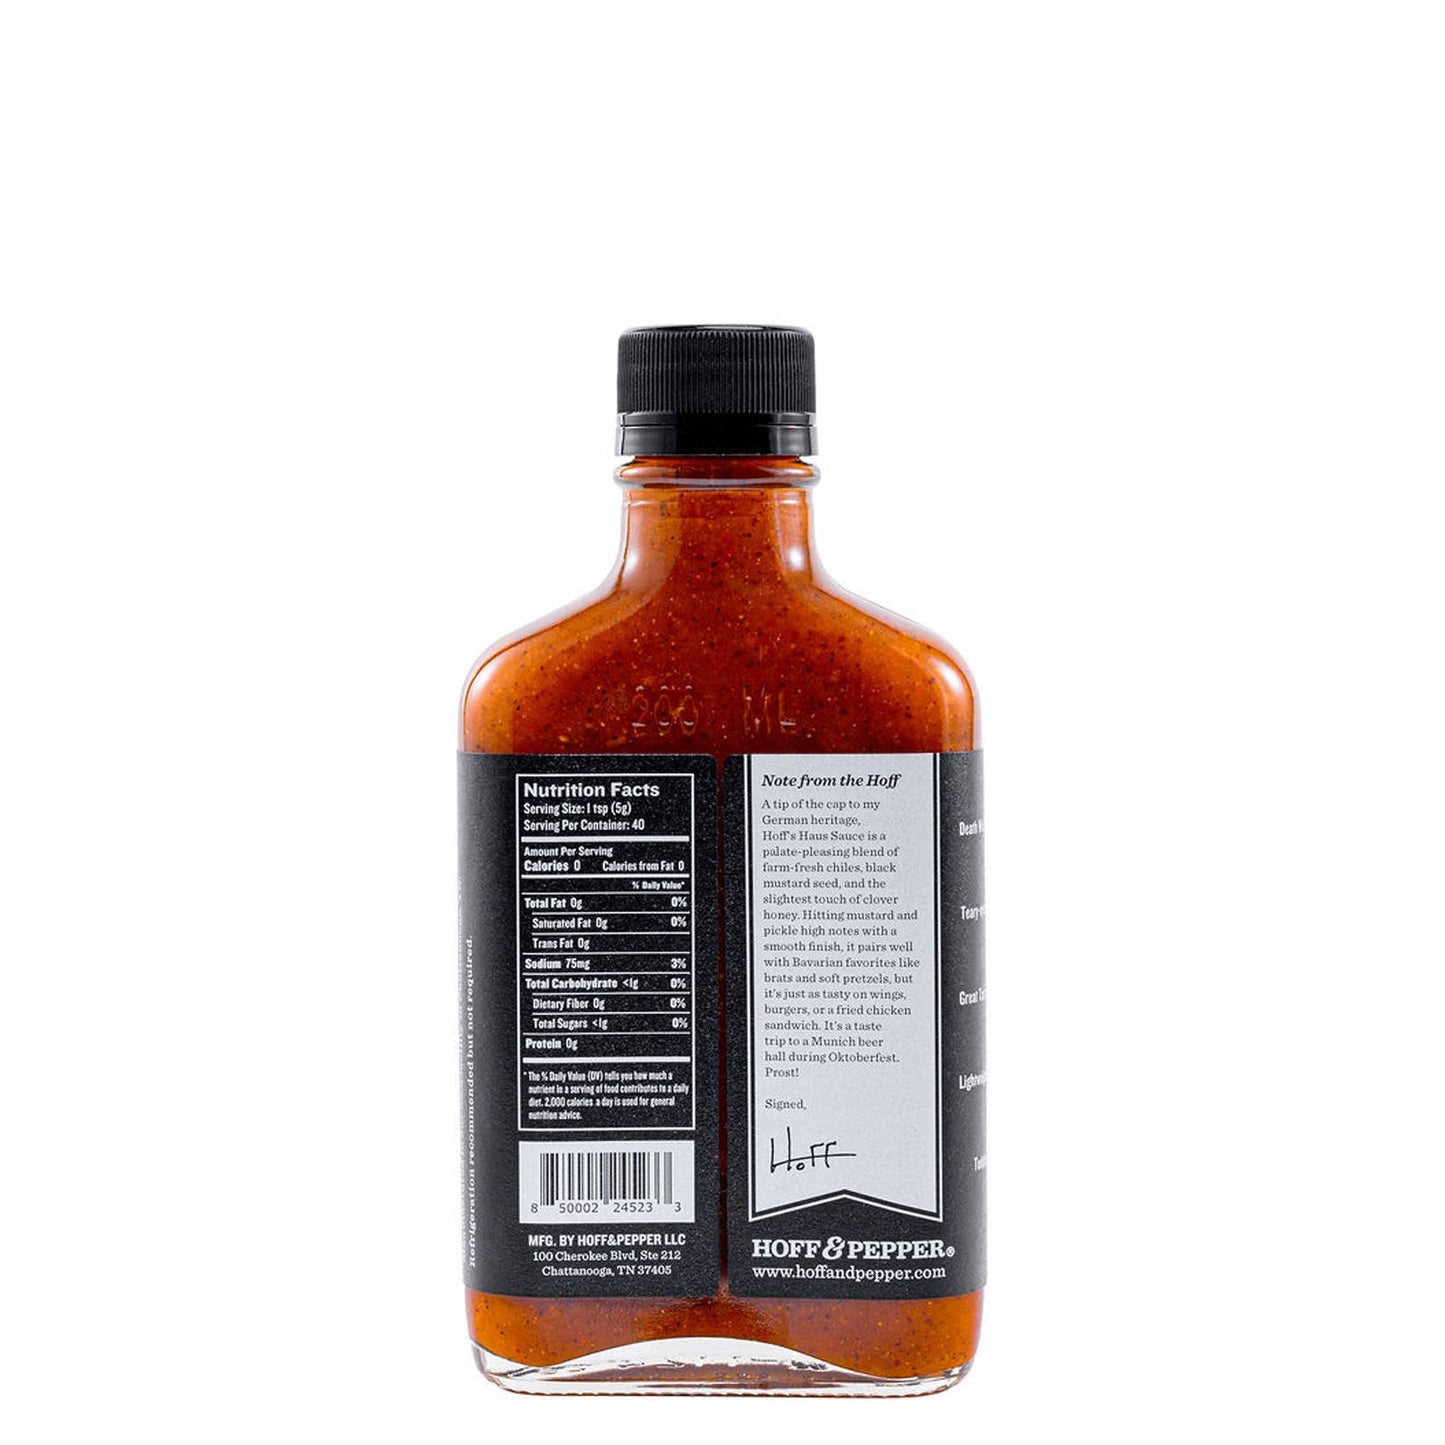 Haus Sauce Hot Sauce - 6.7oz Flask - Featured on Hot Ones!